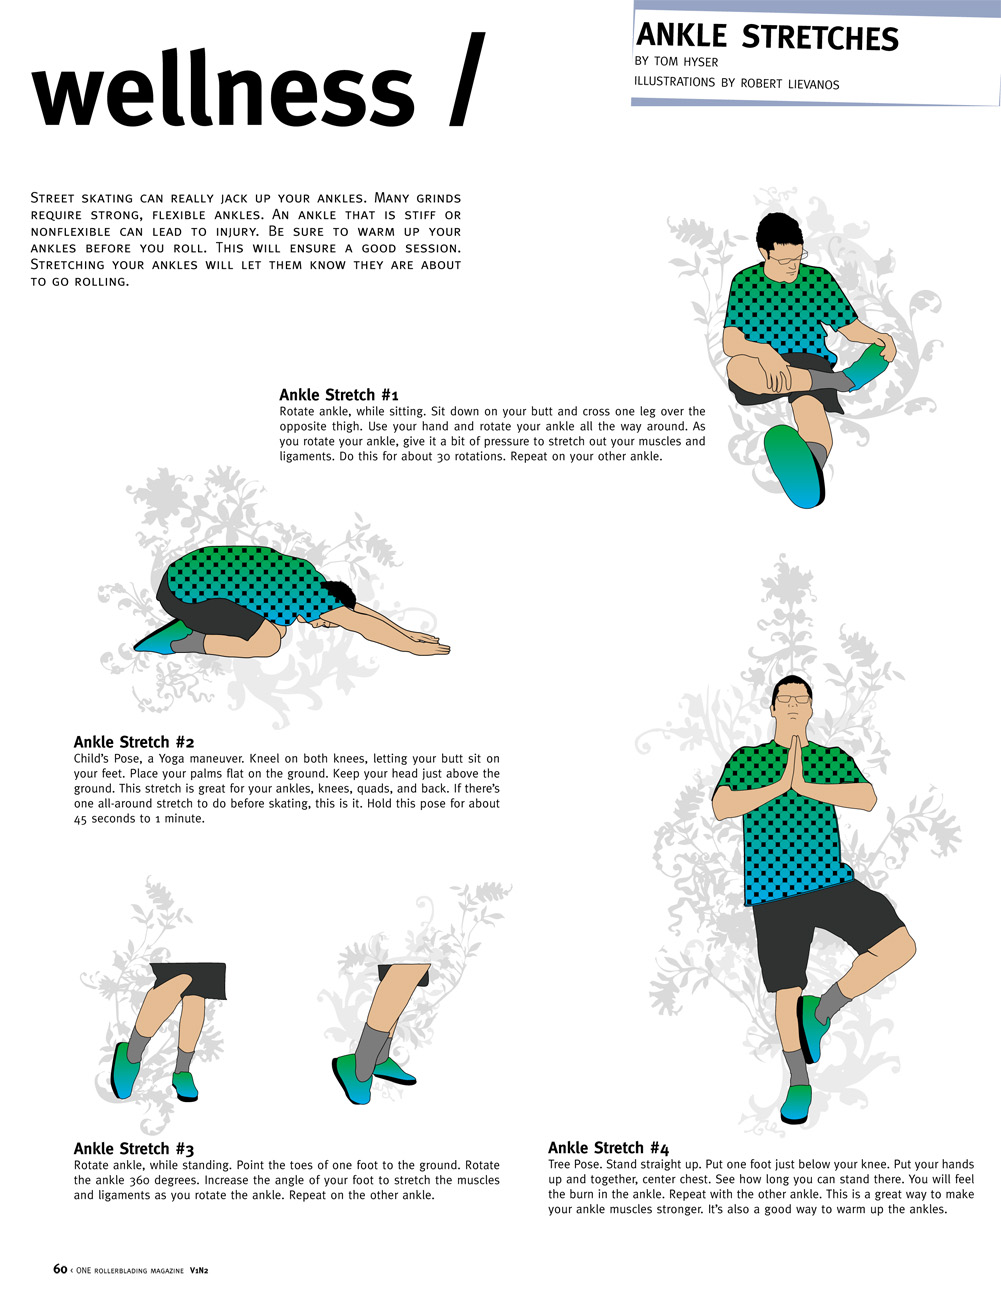 ONEblademag - #2: Ankle Stretches